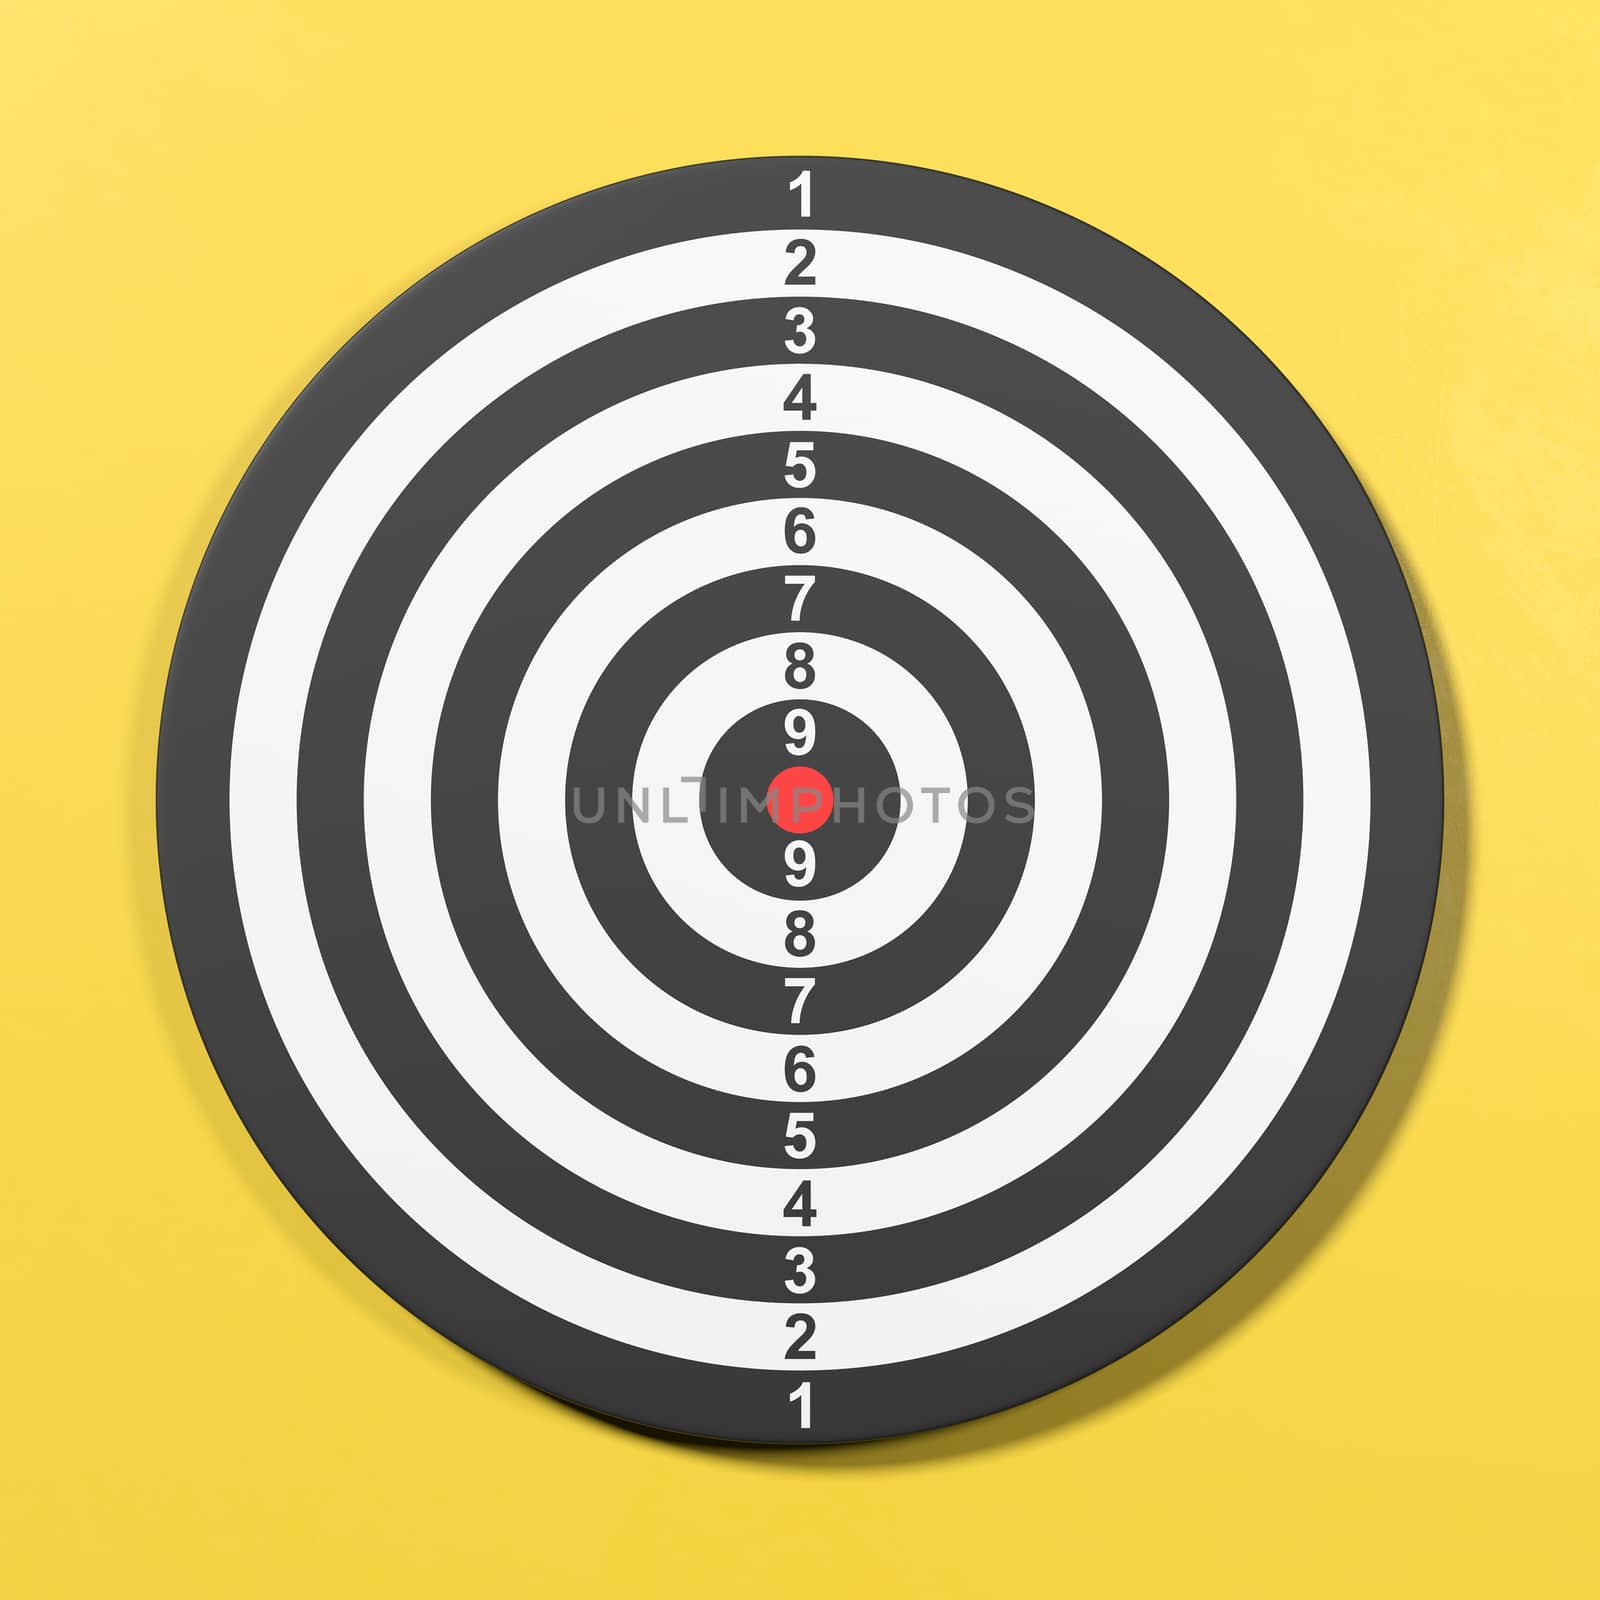 Empty Black and White Dart Target on Yellow Background 3D Illustration